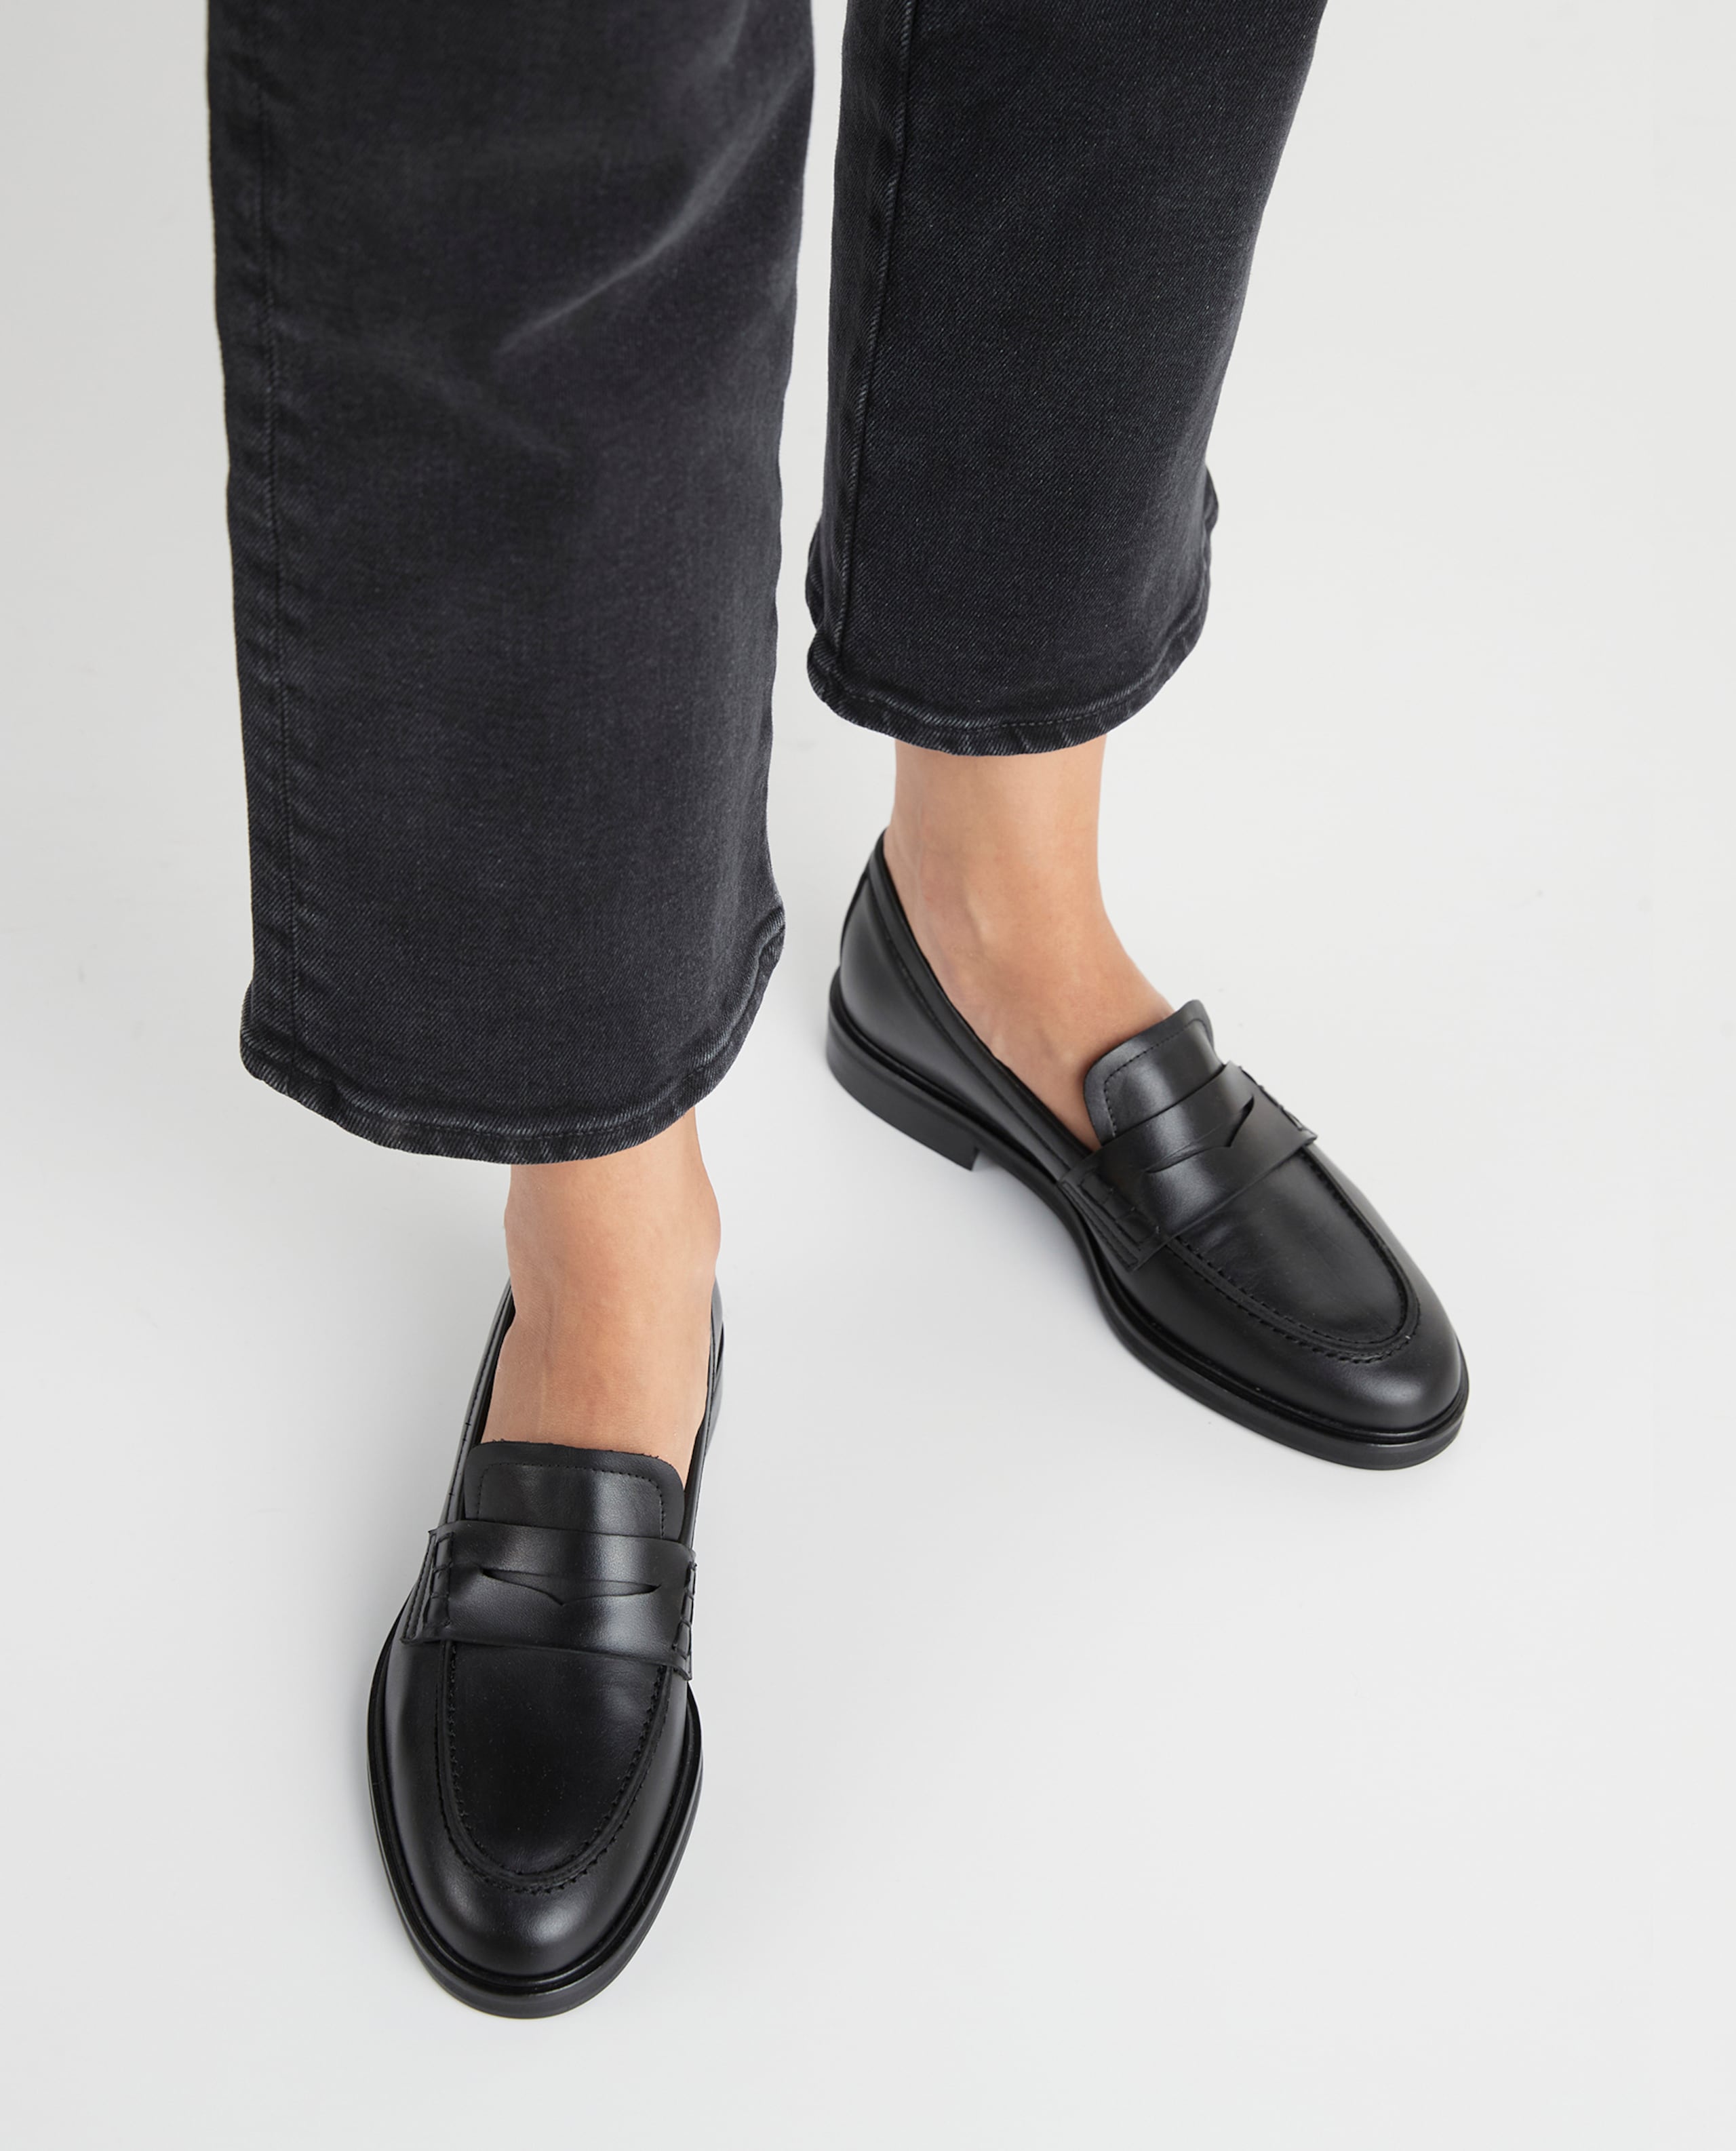 Sara Black Leather Loafers 21010115601-001 - 7